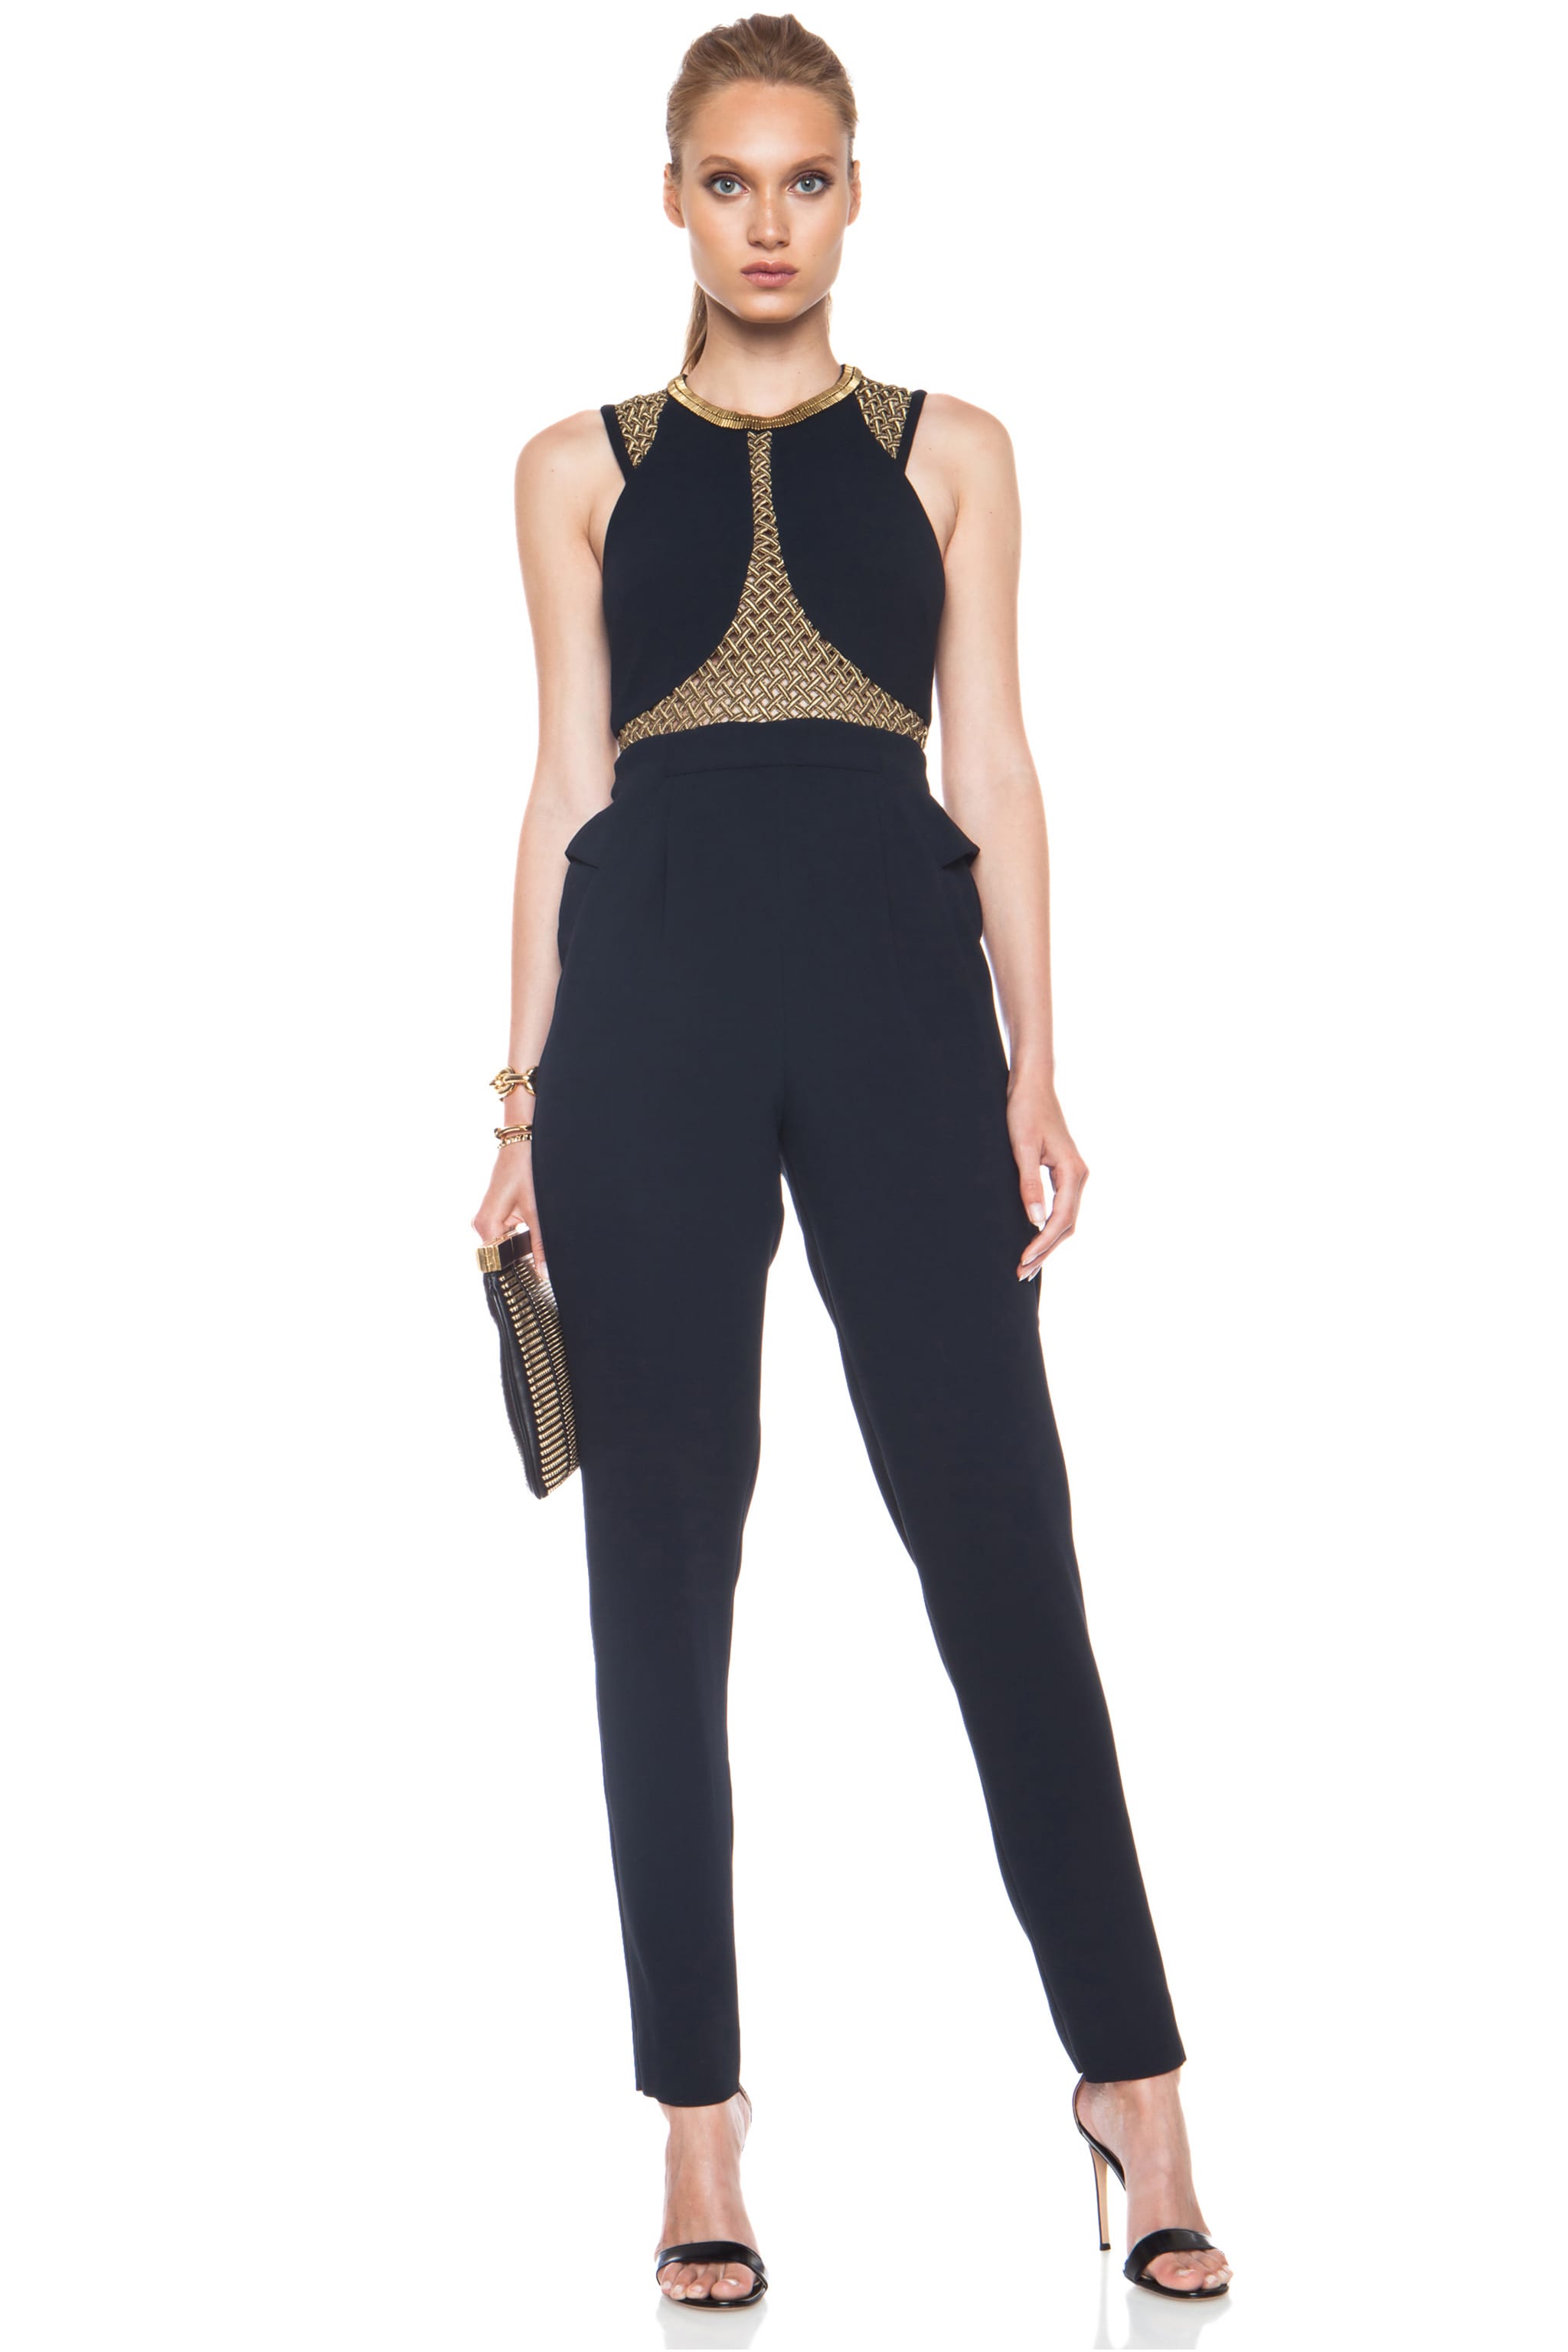 Sass & Bide Just Like Me Poly Jumpsuit in French Navy | FWRD